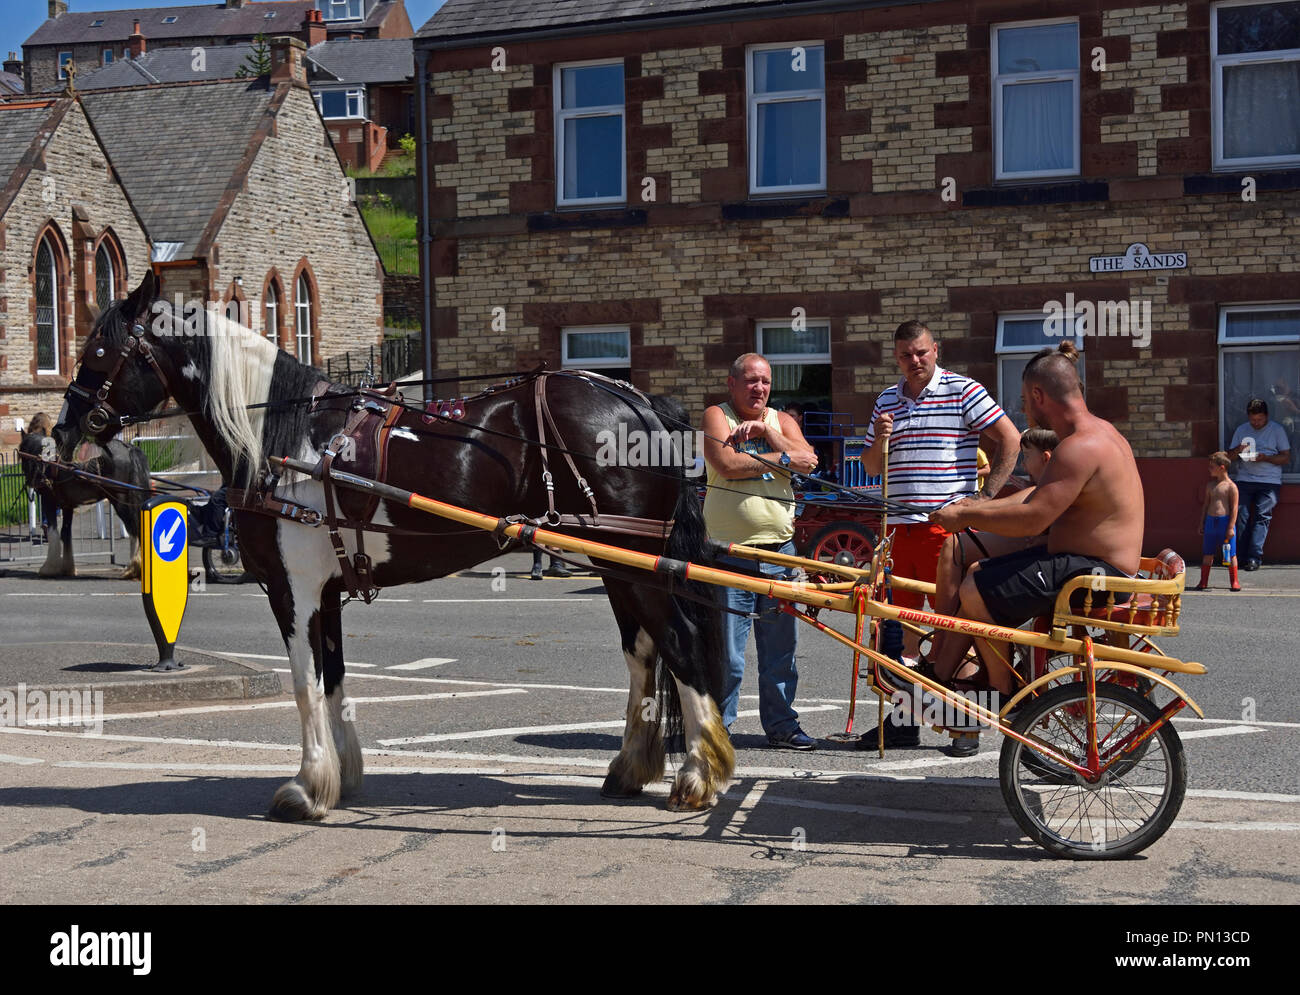 Gypsy Travellers with horse and trotting cart. Appleby Horse Fair 2018. The Sands, Appleby-in-Westmorland, Cumbria, England, United Kingdom, Europe. Stock Photo